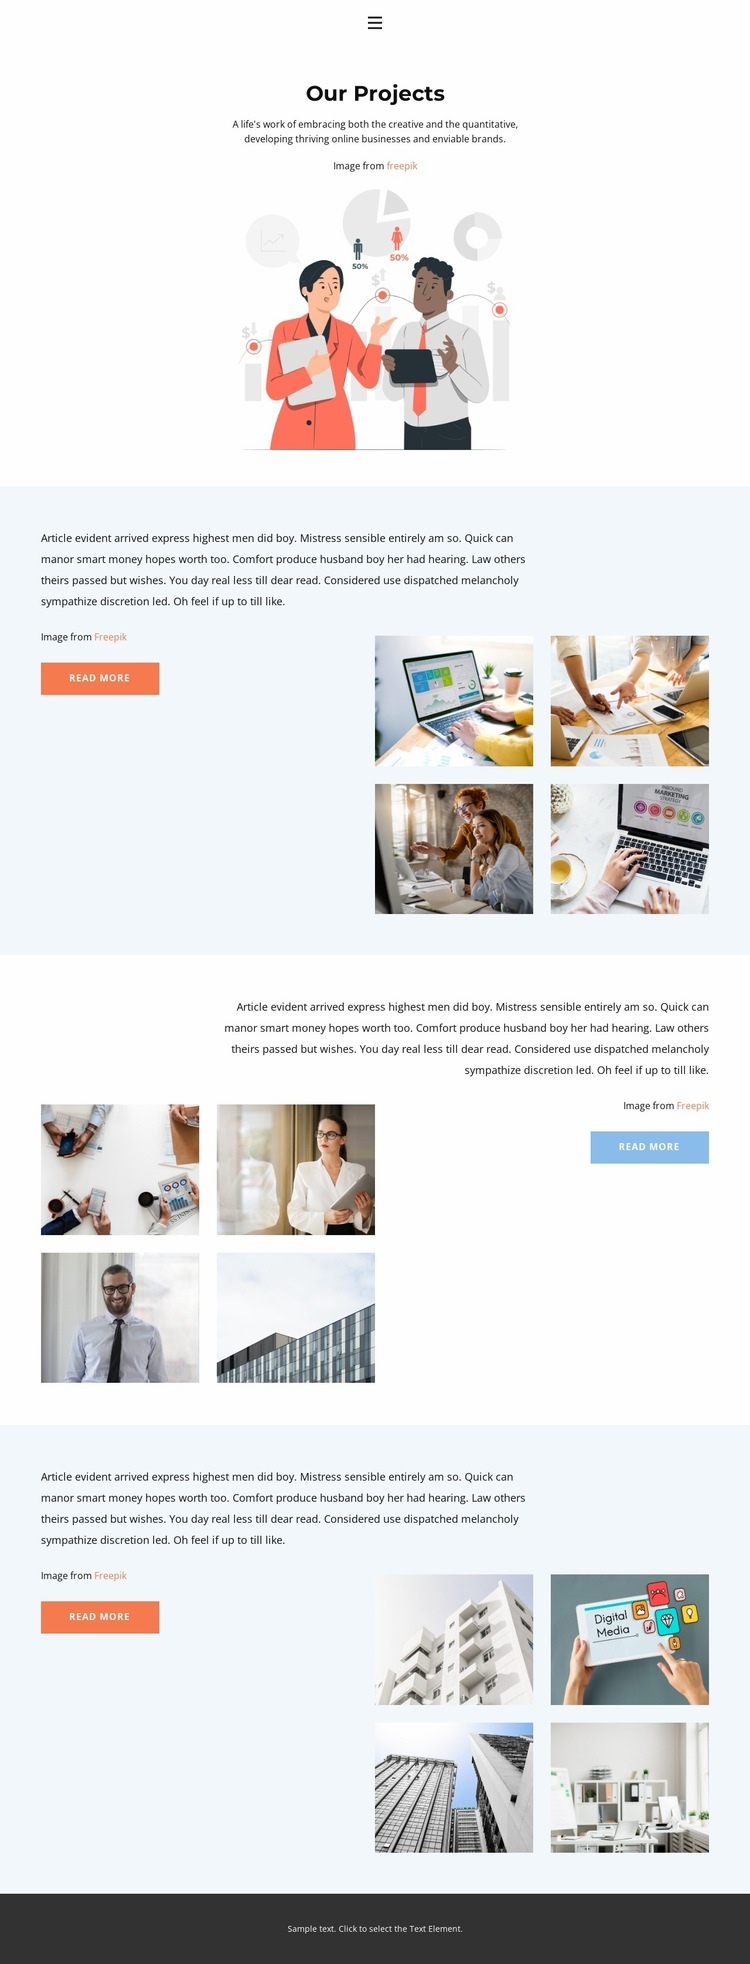 More about our projects Squarespace Template Alternative